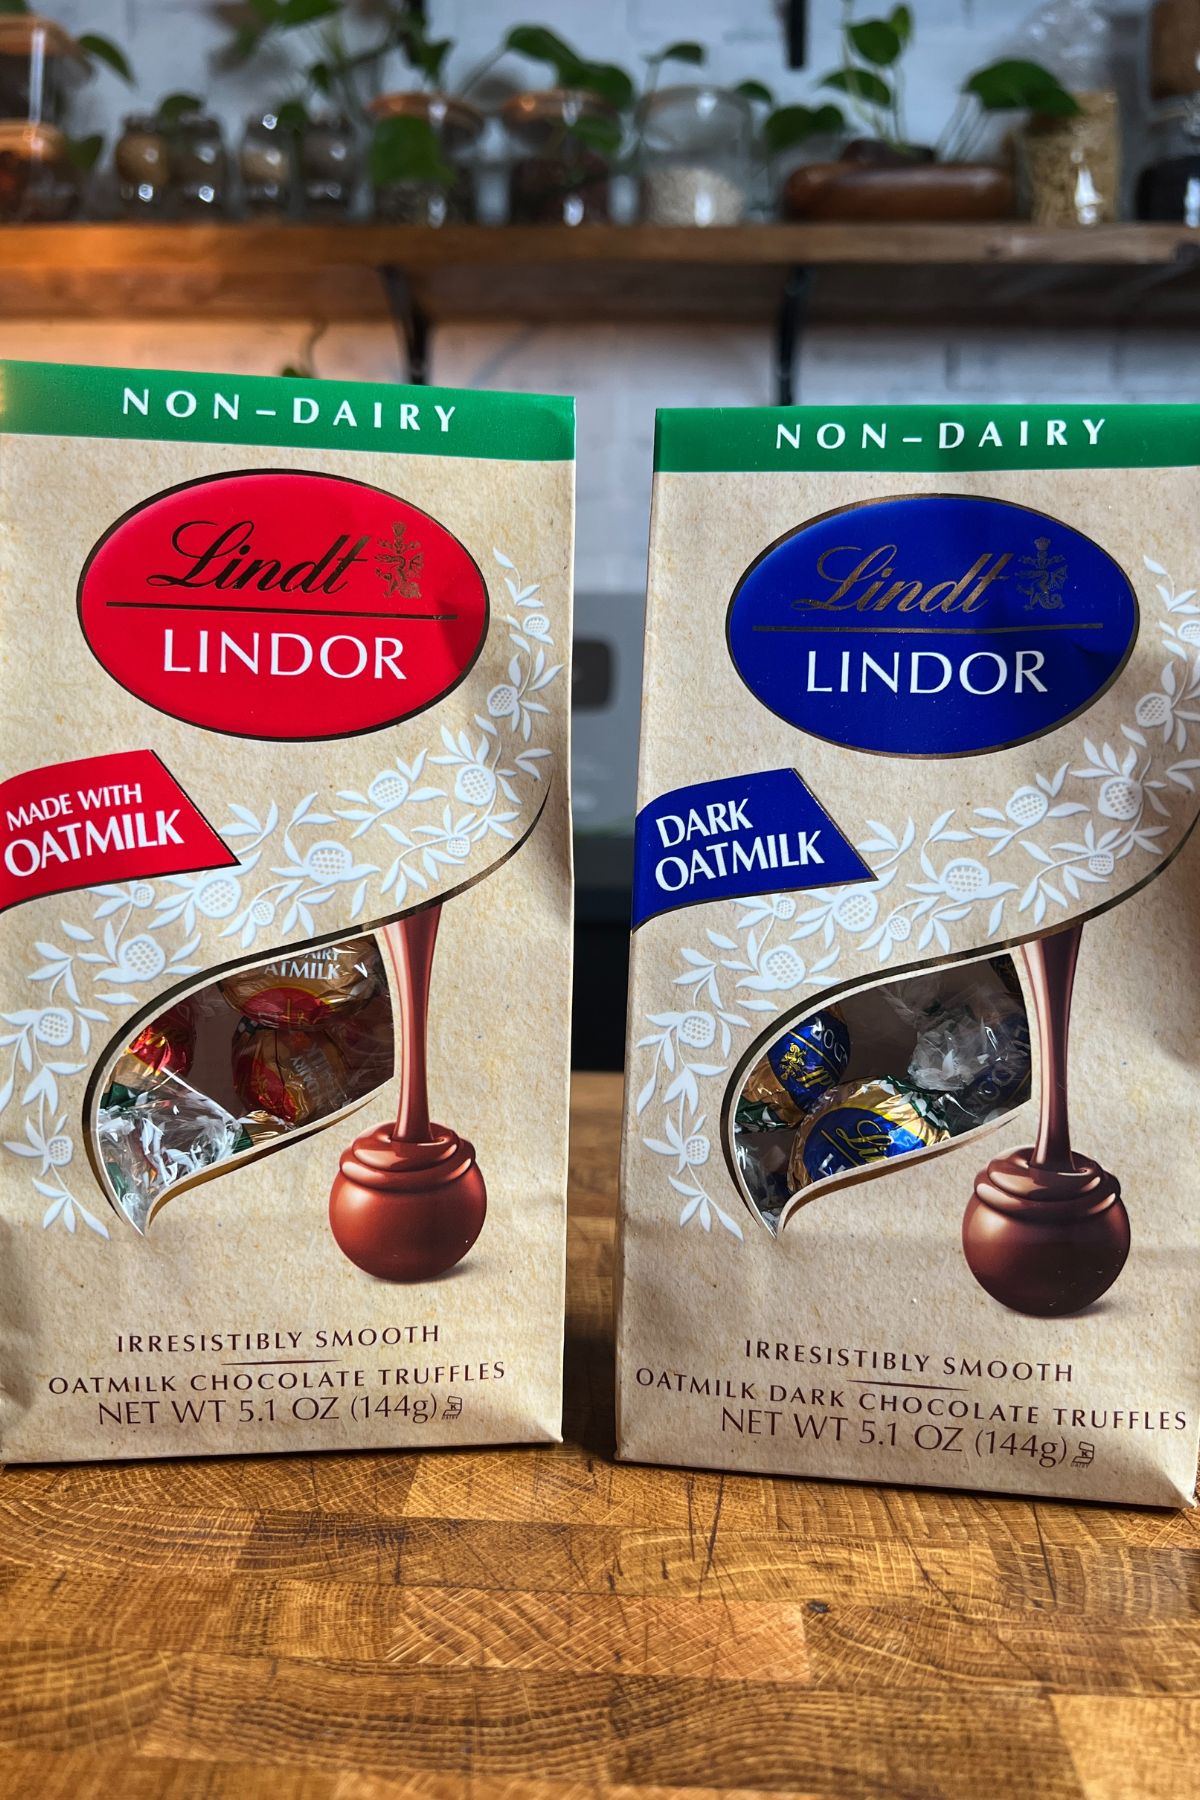 2 packages of lindt lindor non dairy oatmilk truffles side by side on a table.